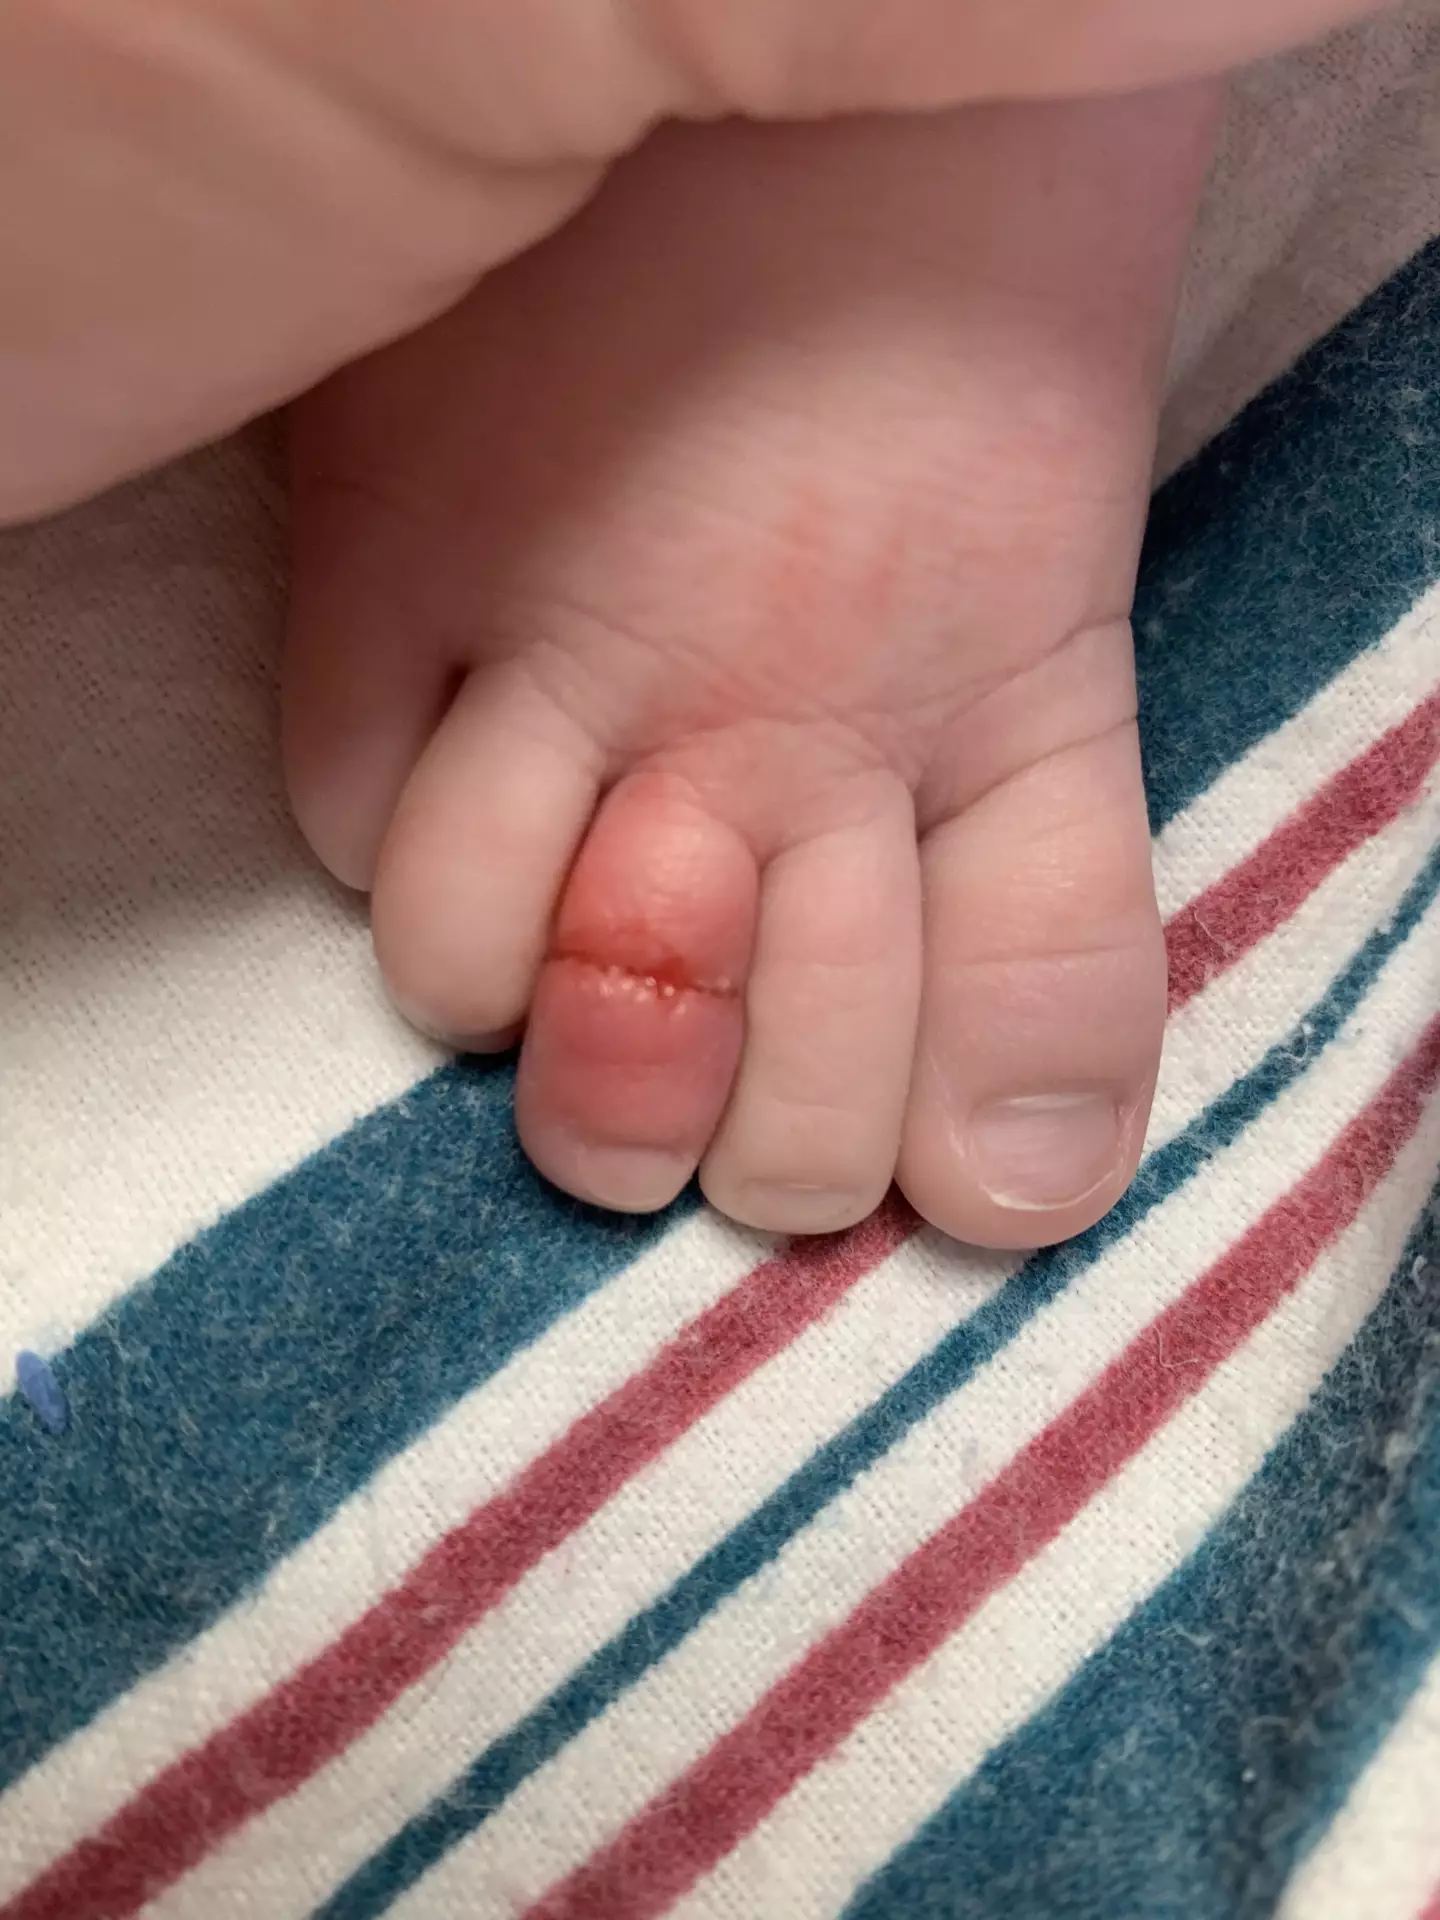 Logan's toe started to swell and become red (